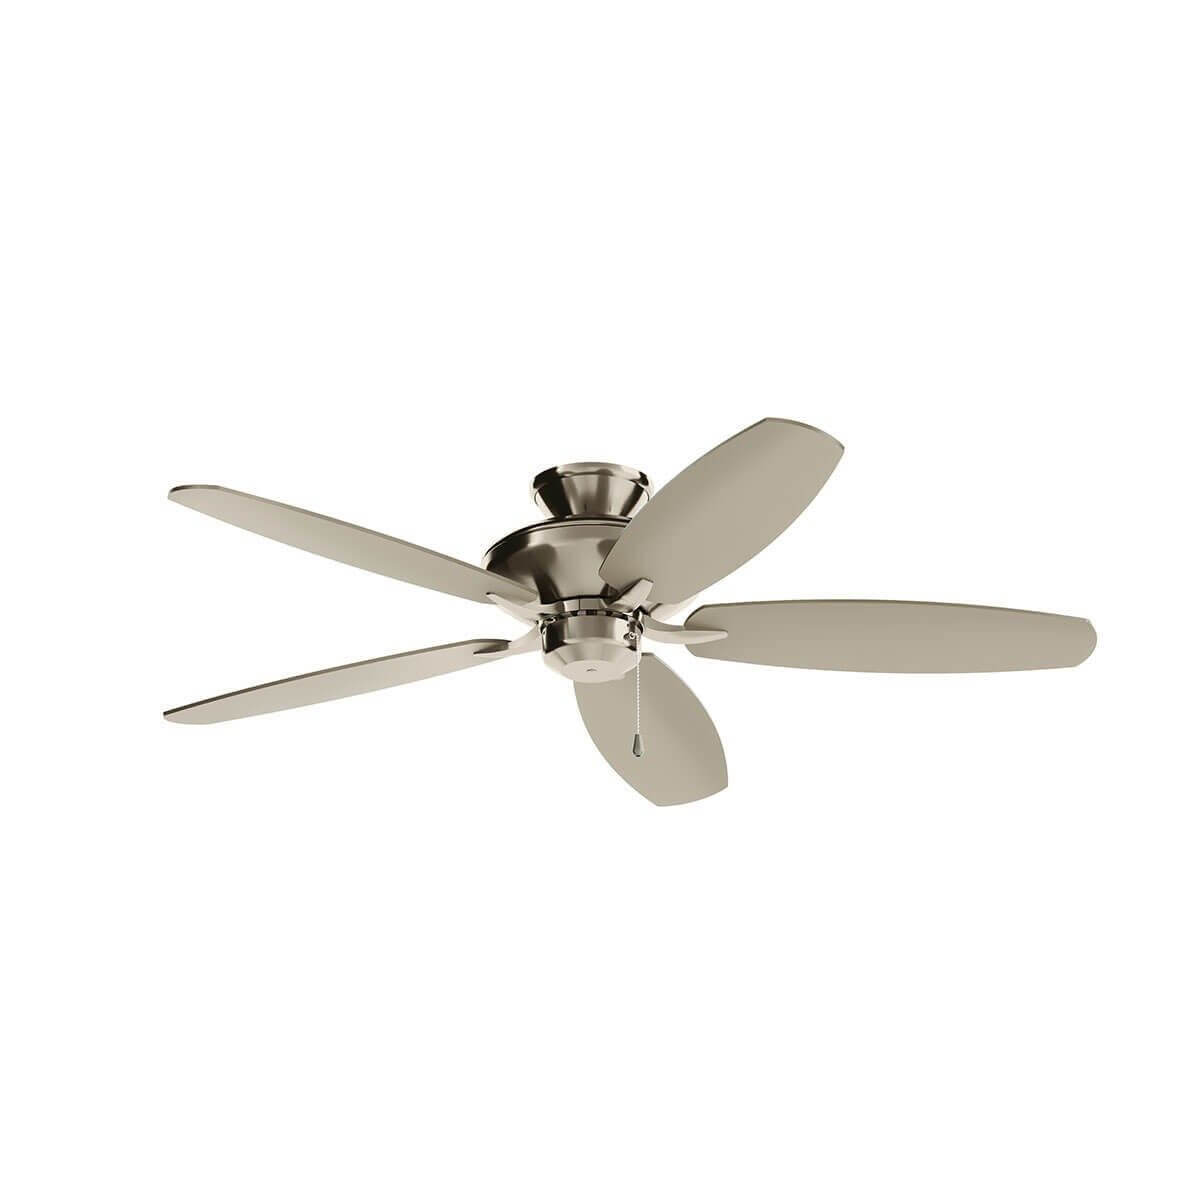 Kichler Renew 52 inch 5 Blade Pull Chain Ceiling Fan in Brushed Stainless Steel 330160BSS